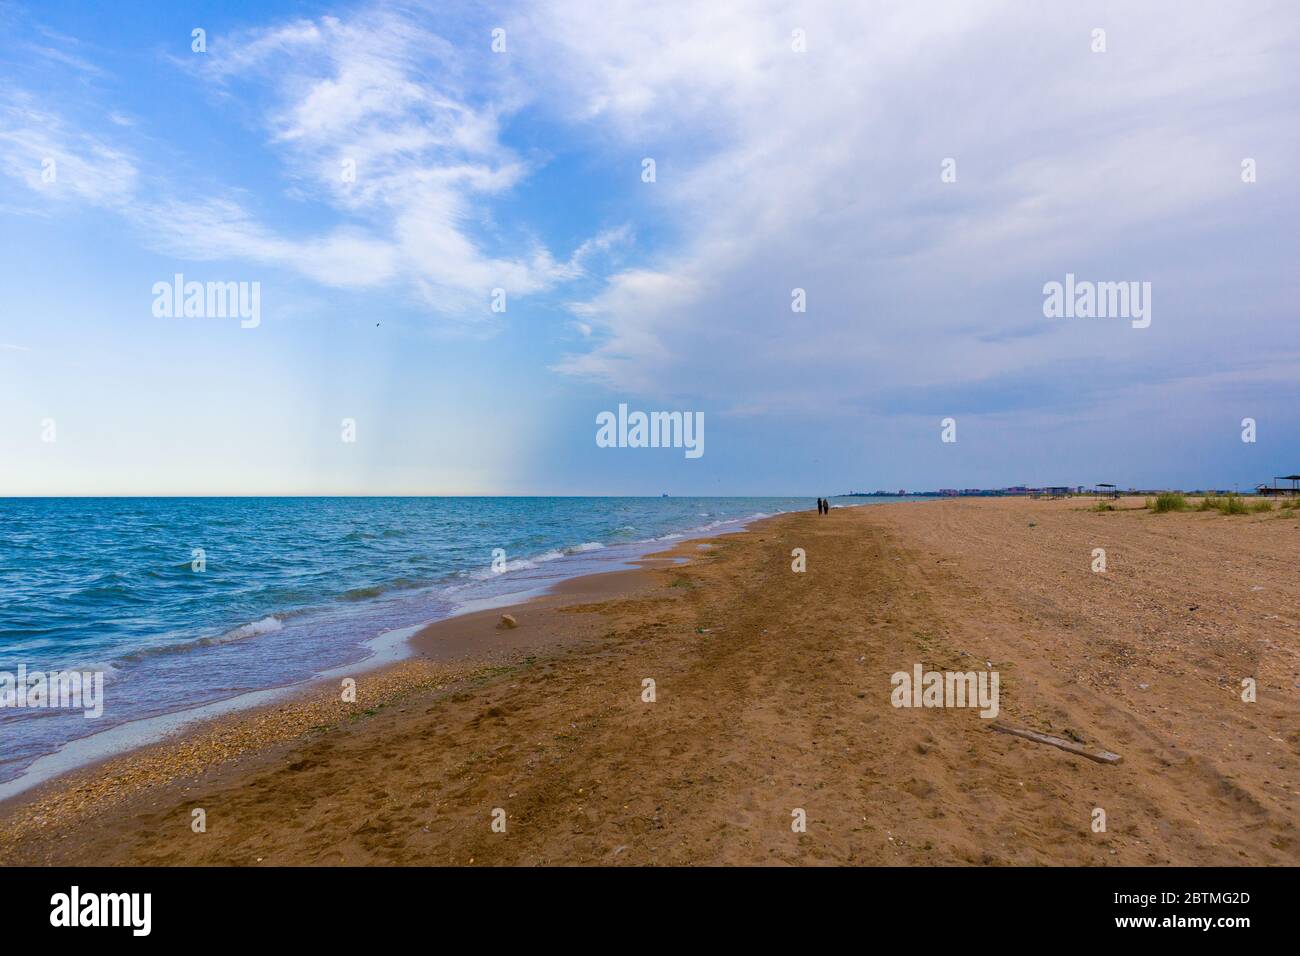 Clean beach without people with sea and epic clouds. Stock Photo